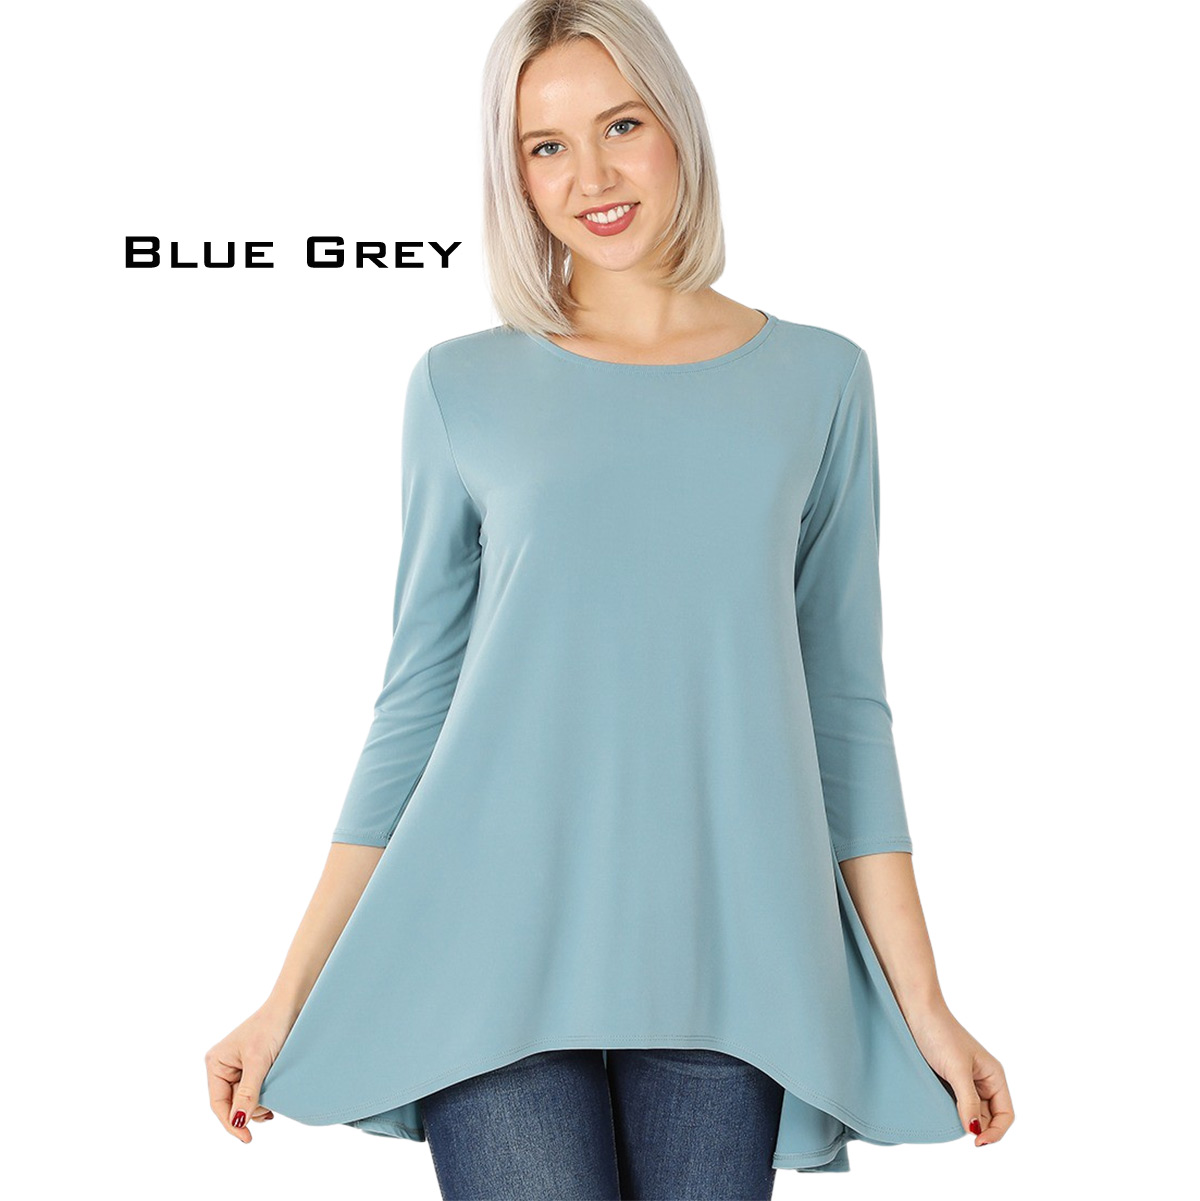 BLUE GREY Ity High-Low 3/4 Sleeve Top 2367